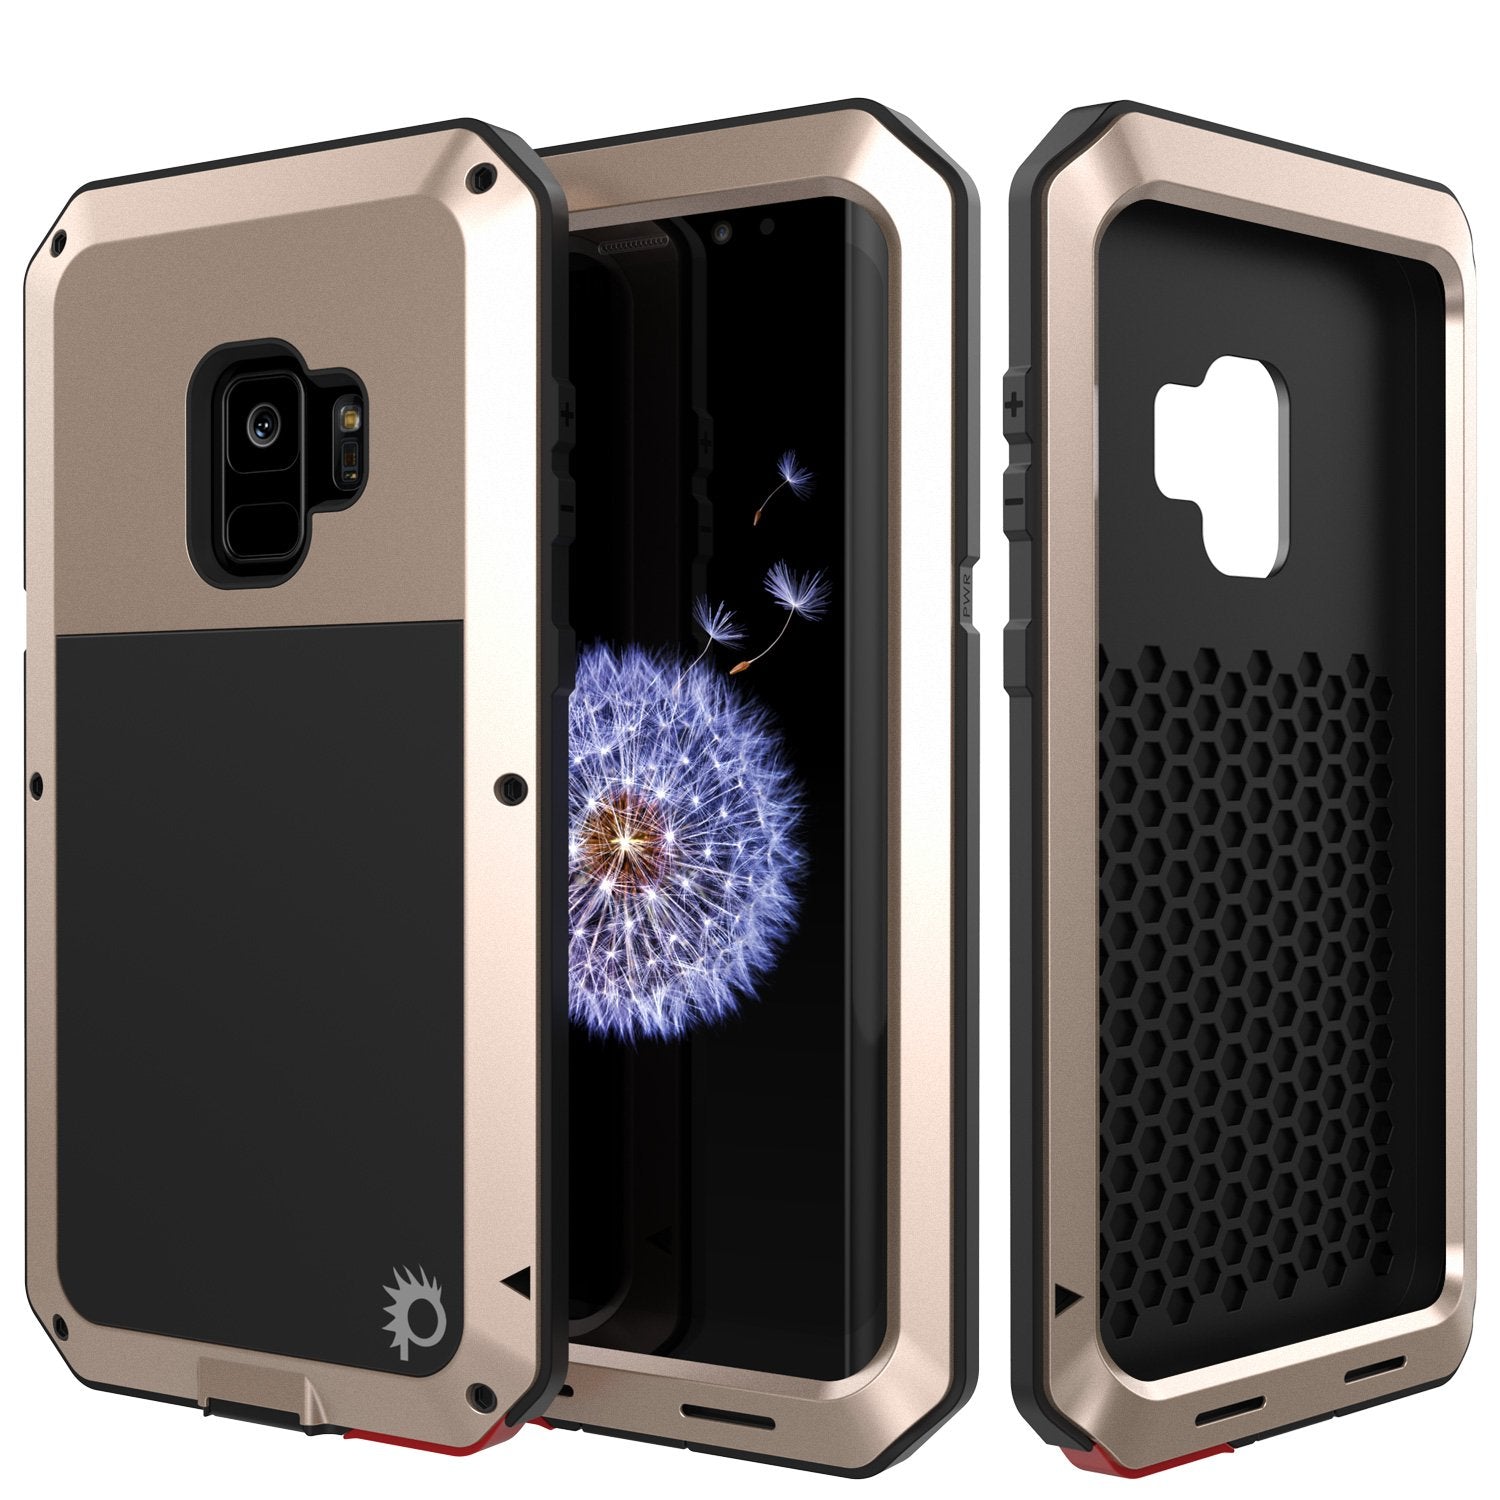 Galaxy S9 Metal Case, Heavy Duty Military Grade Rugged Armor Cover [shock proof] Hybrid Full Body Hard Aluminum & TPU Design [non slip] W/ Prime Drop Protection for Samsung Galaxy S9 [Gold]